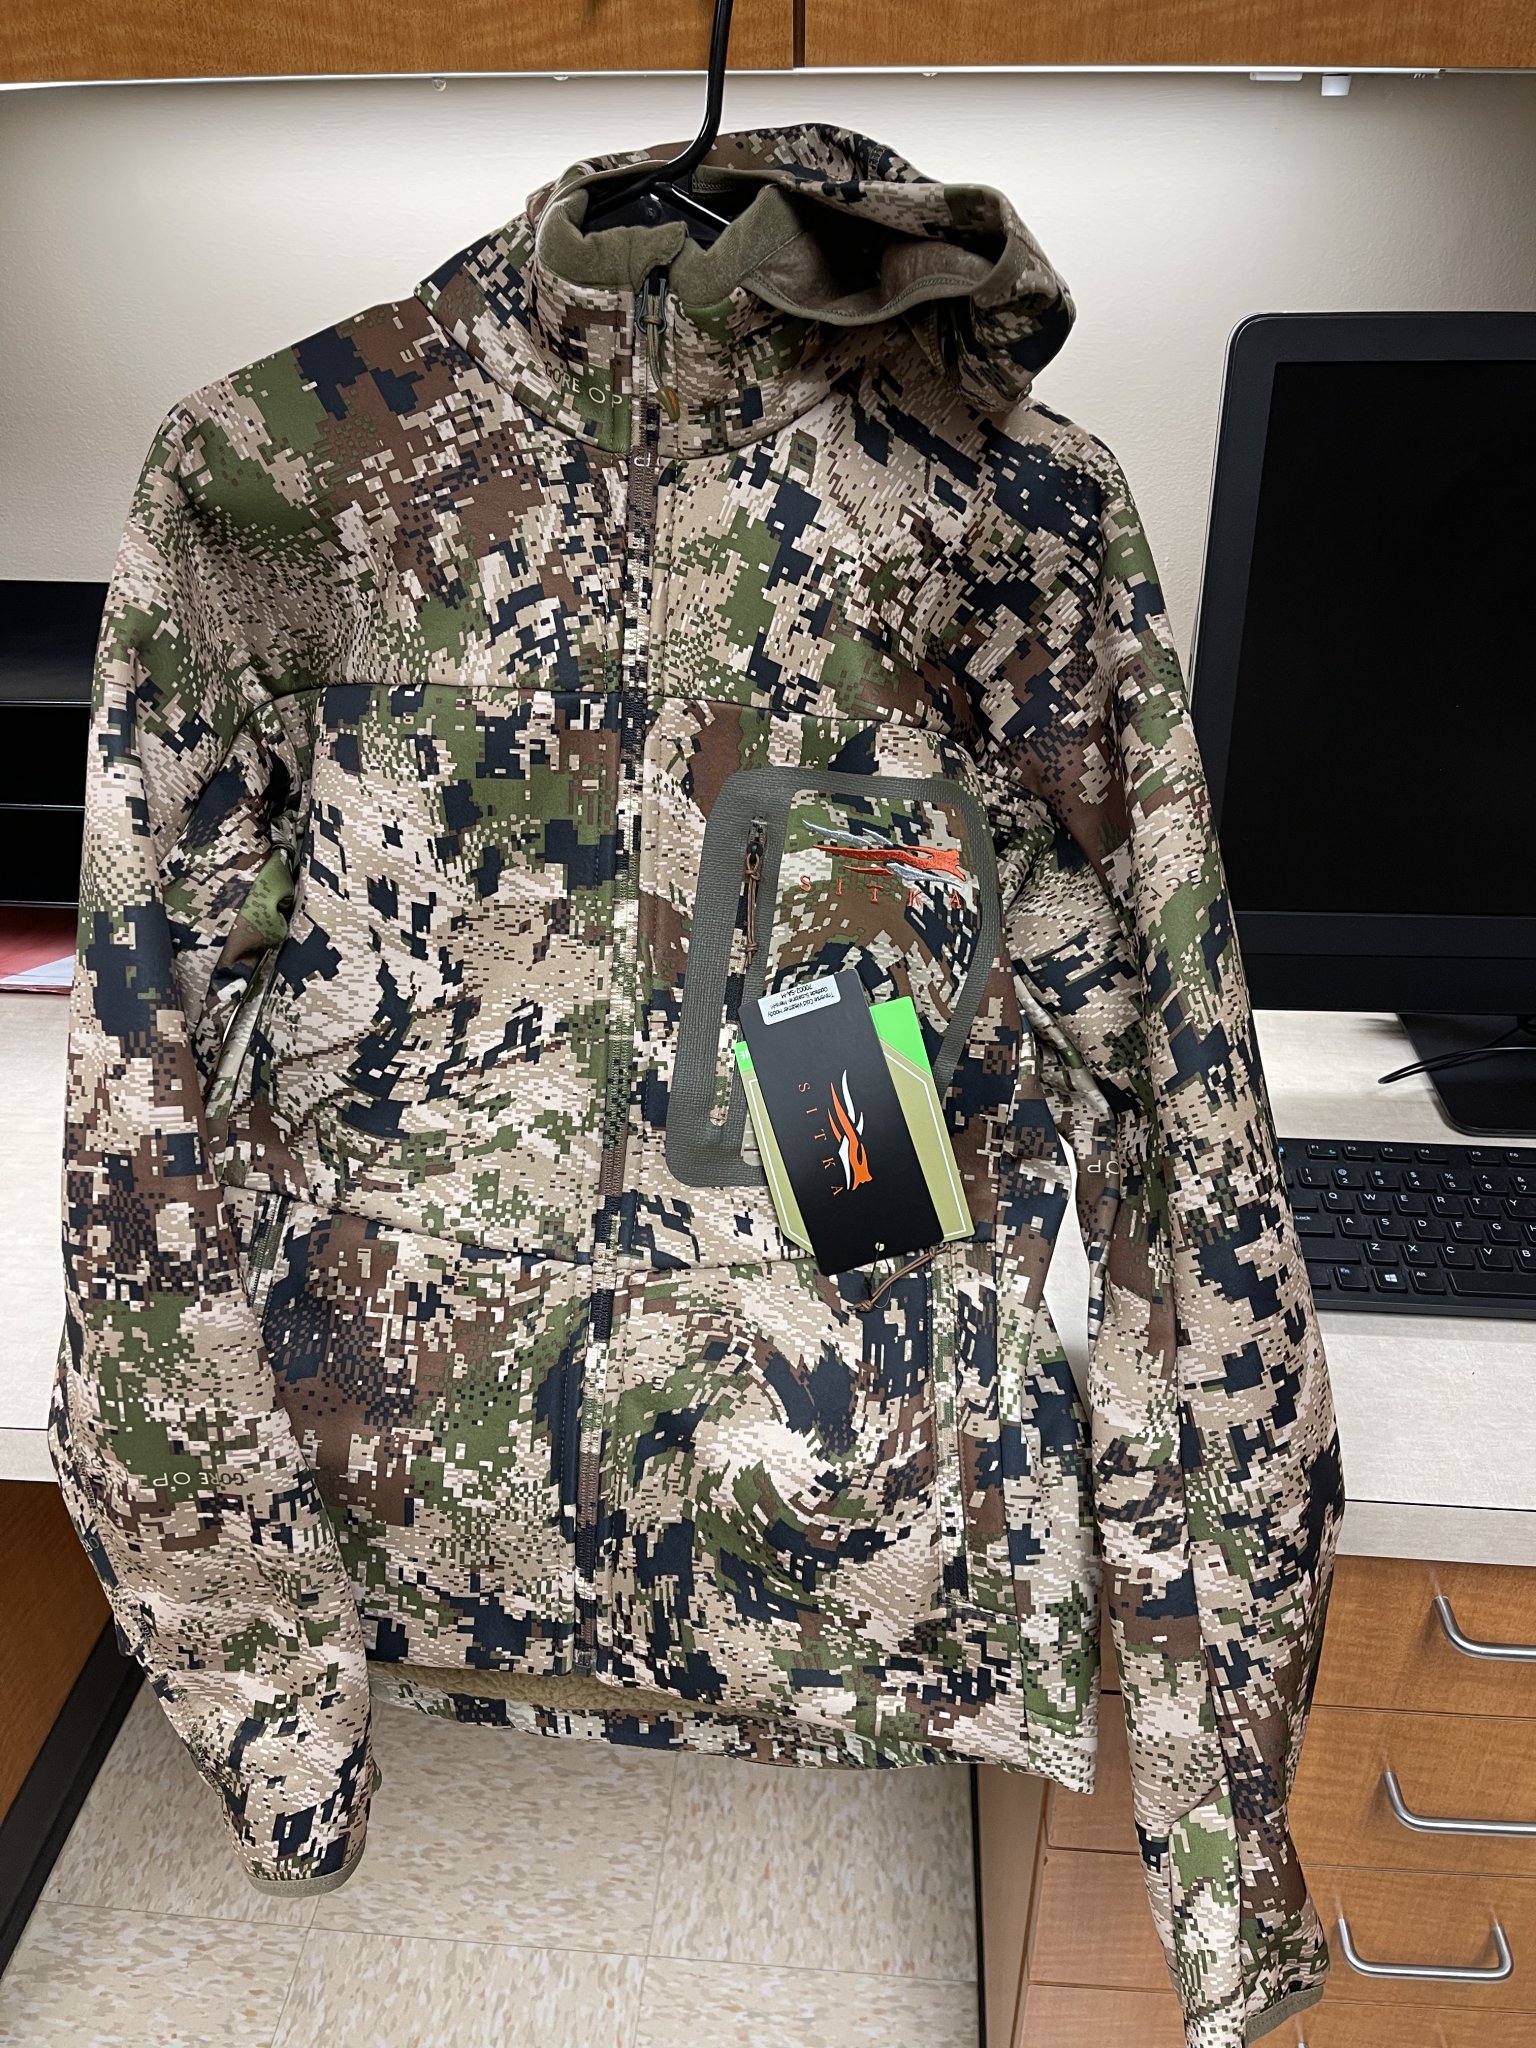 SOLD - Several new Sitka jackets and hats | Sniper's Hide Forum